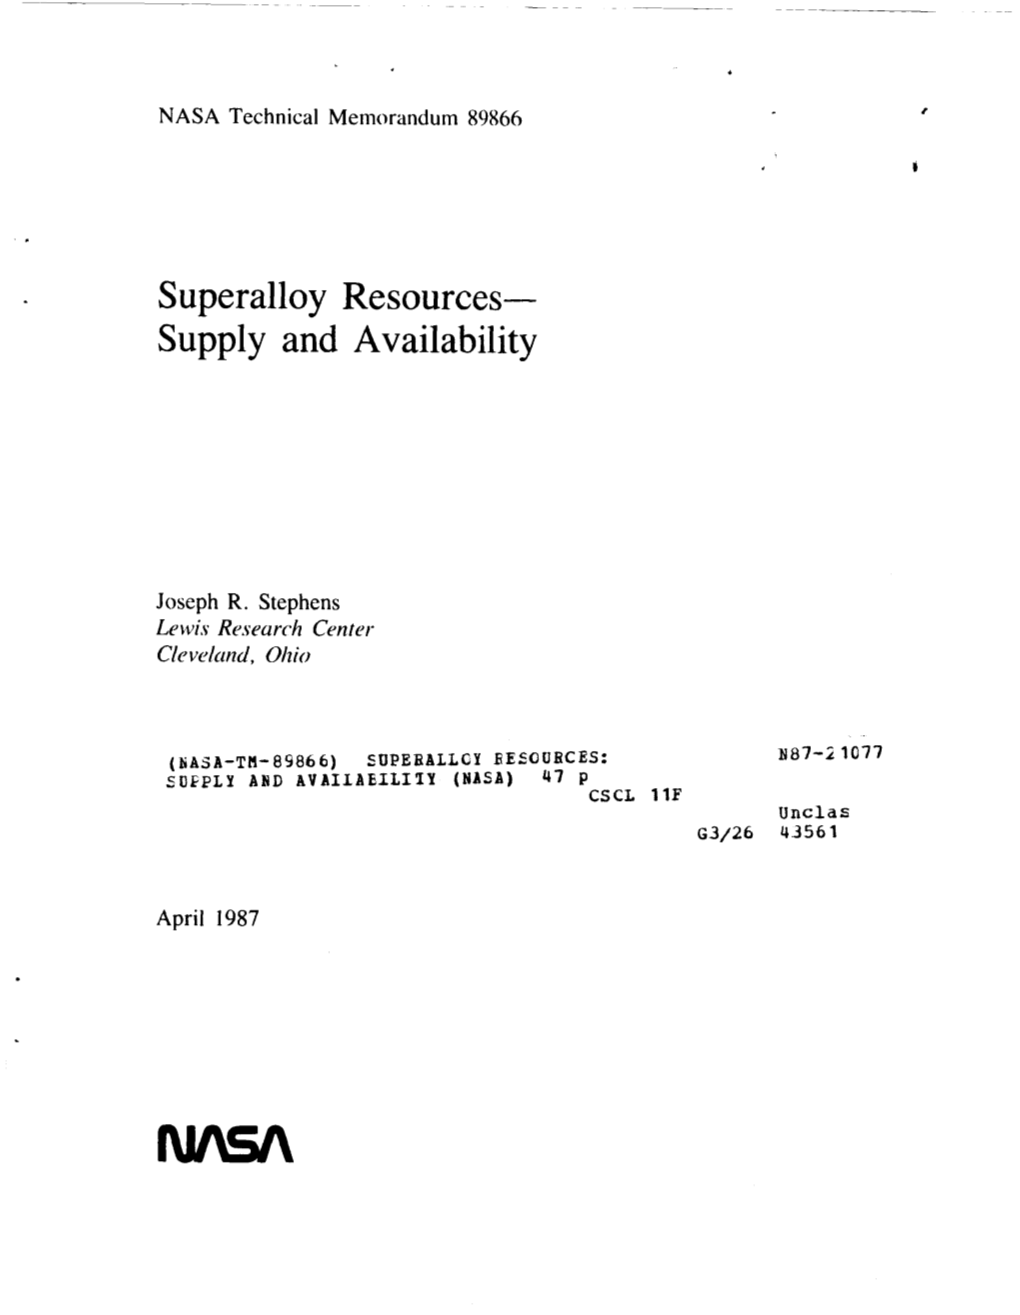 Superalloy Resources- Supply and Availability